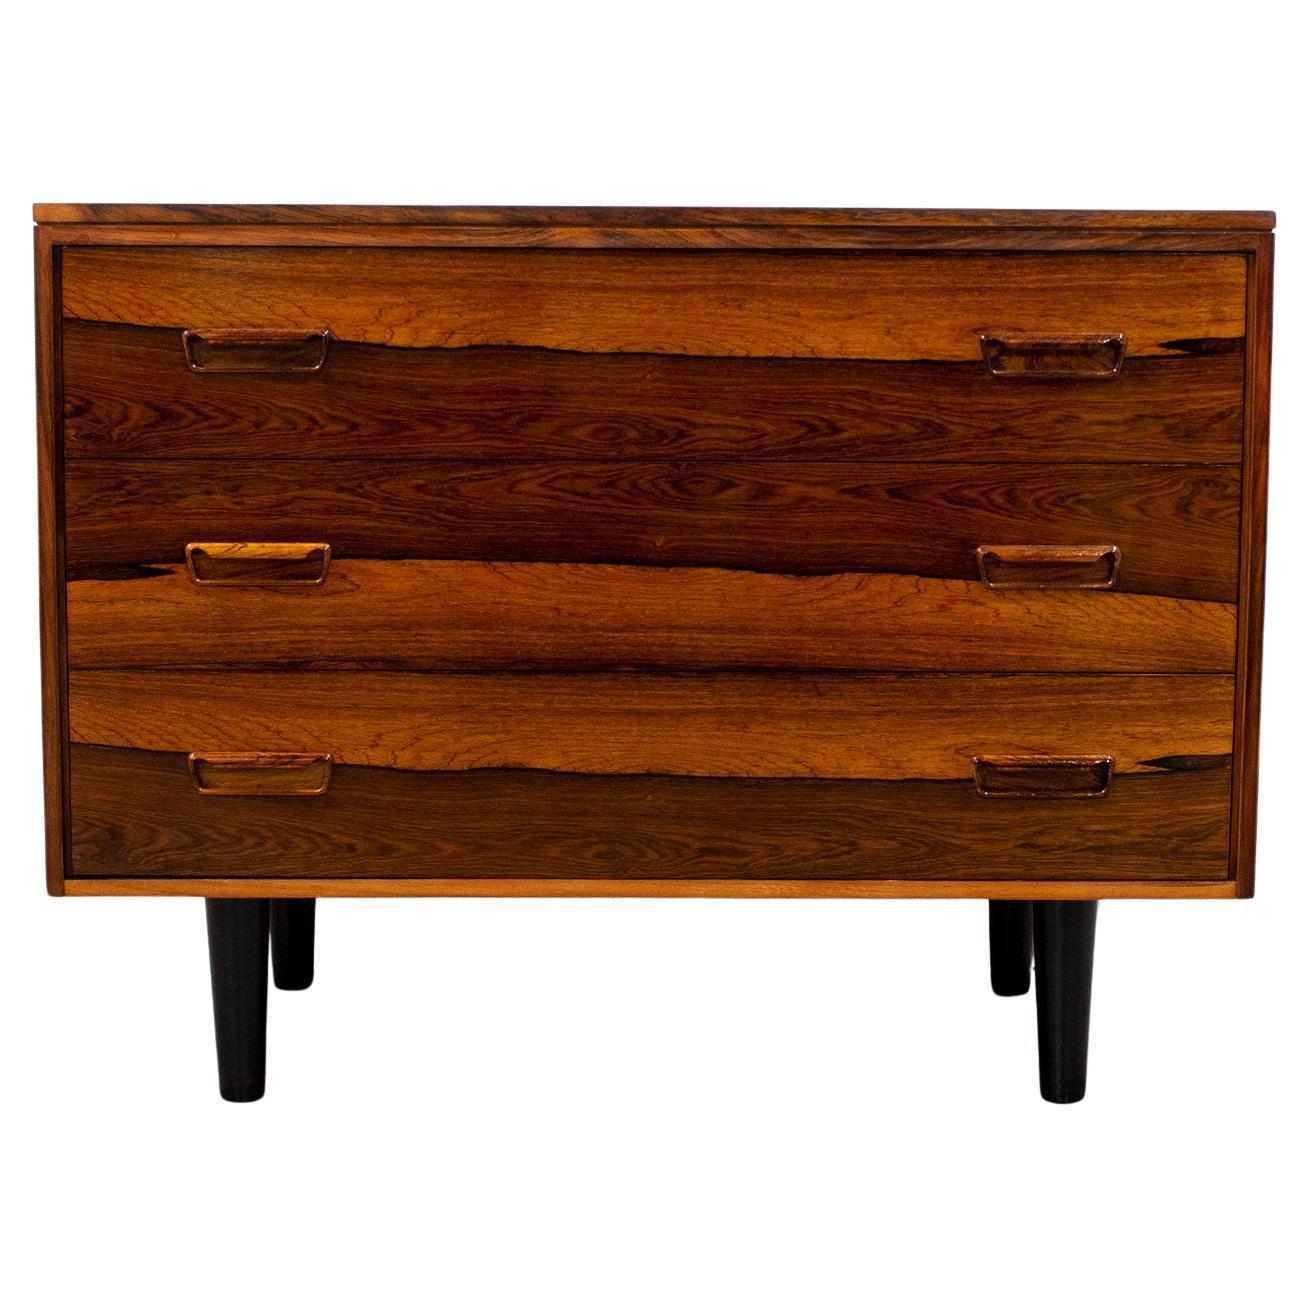 Danish Rosewood Chest of Drawers in the manner of Arne Wahl Iversen, 1960s For Sale